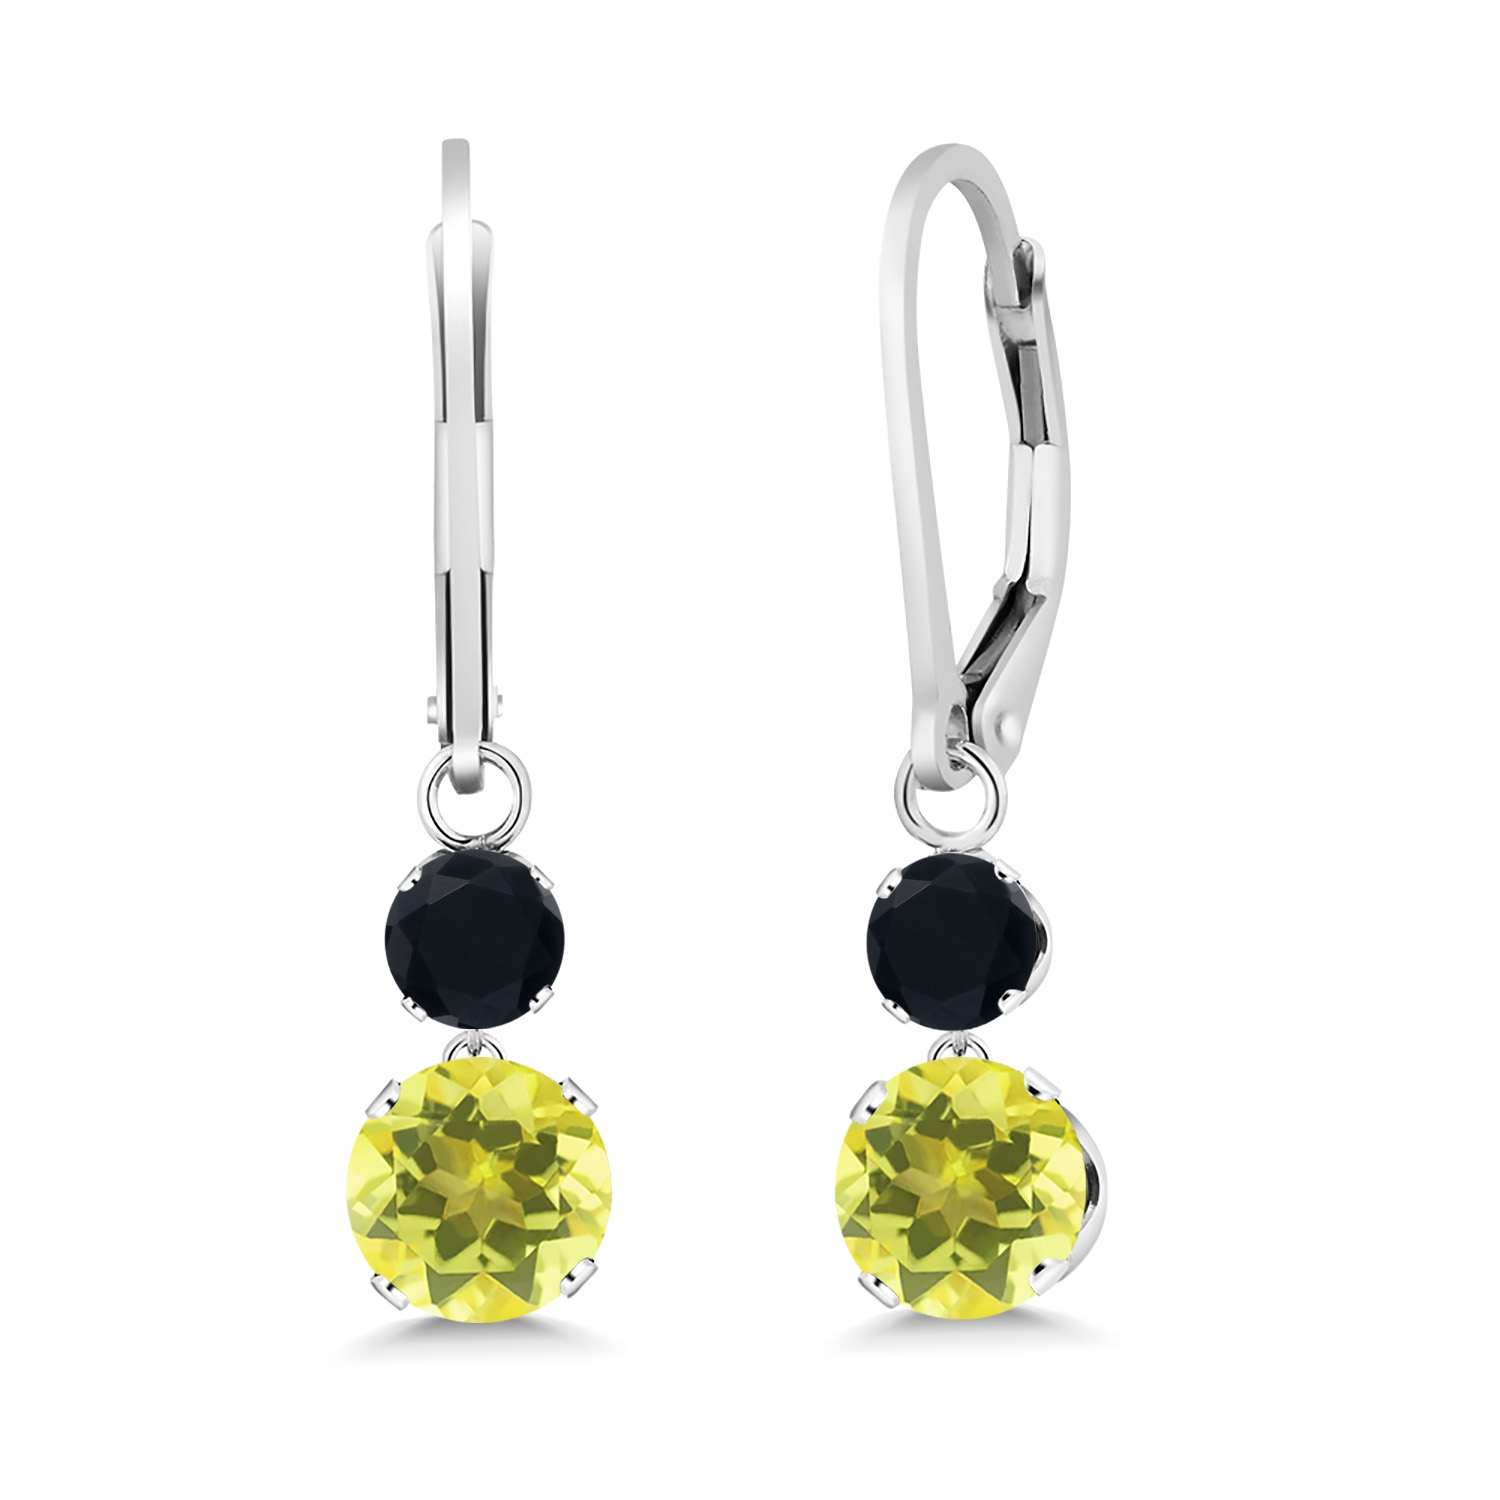 Gem Stone King 2.44 Ct Round Canary Mystic Topaz Black Onyx 925 Sterling Silver Earrings